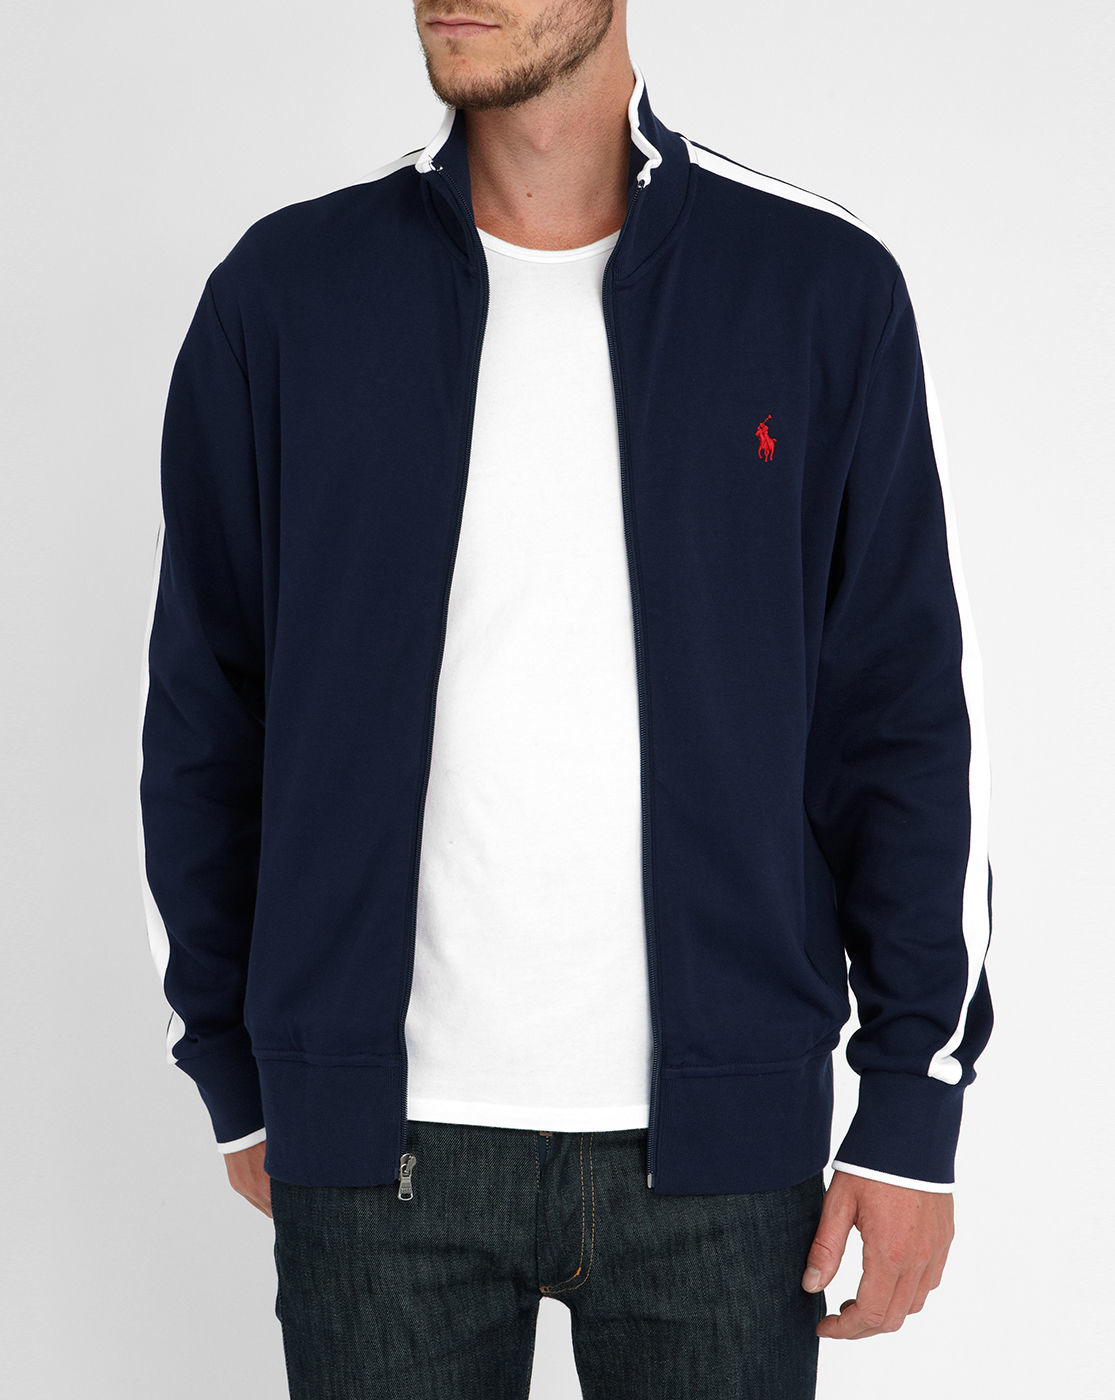 Polo ralph lauren Navy With White Stripe Track Jacket in Blue for Men